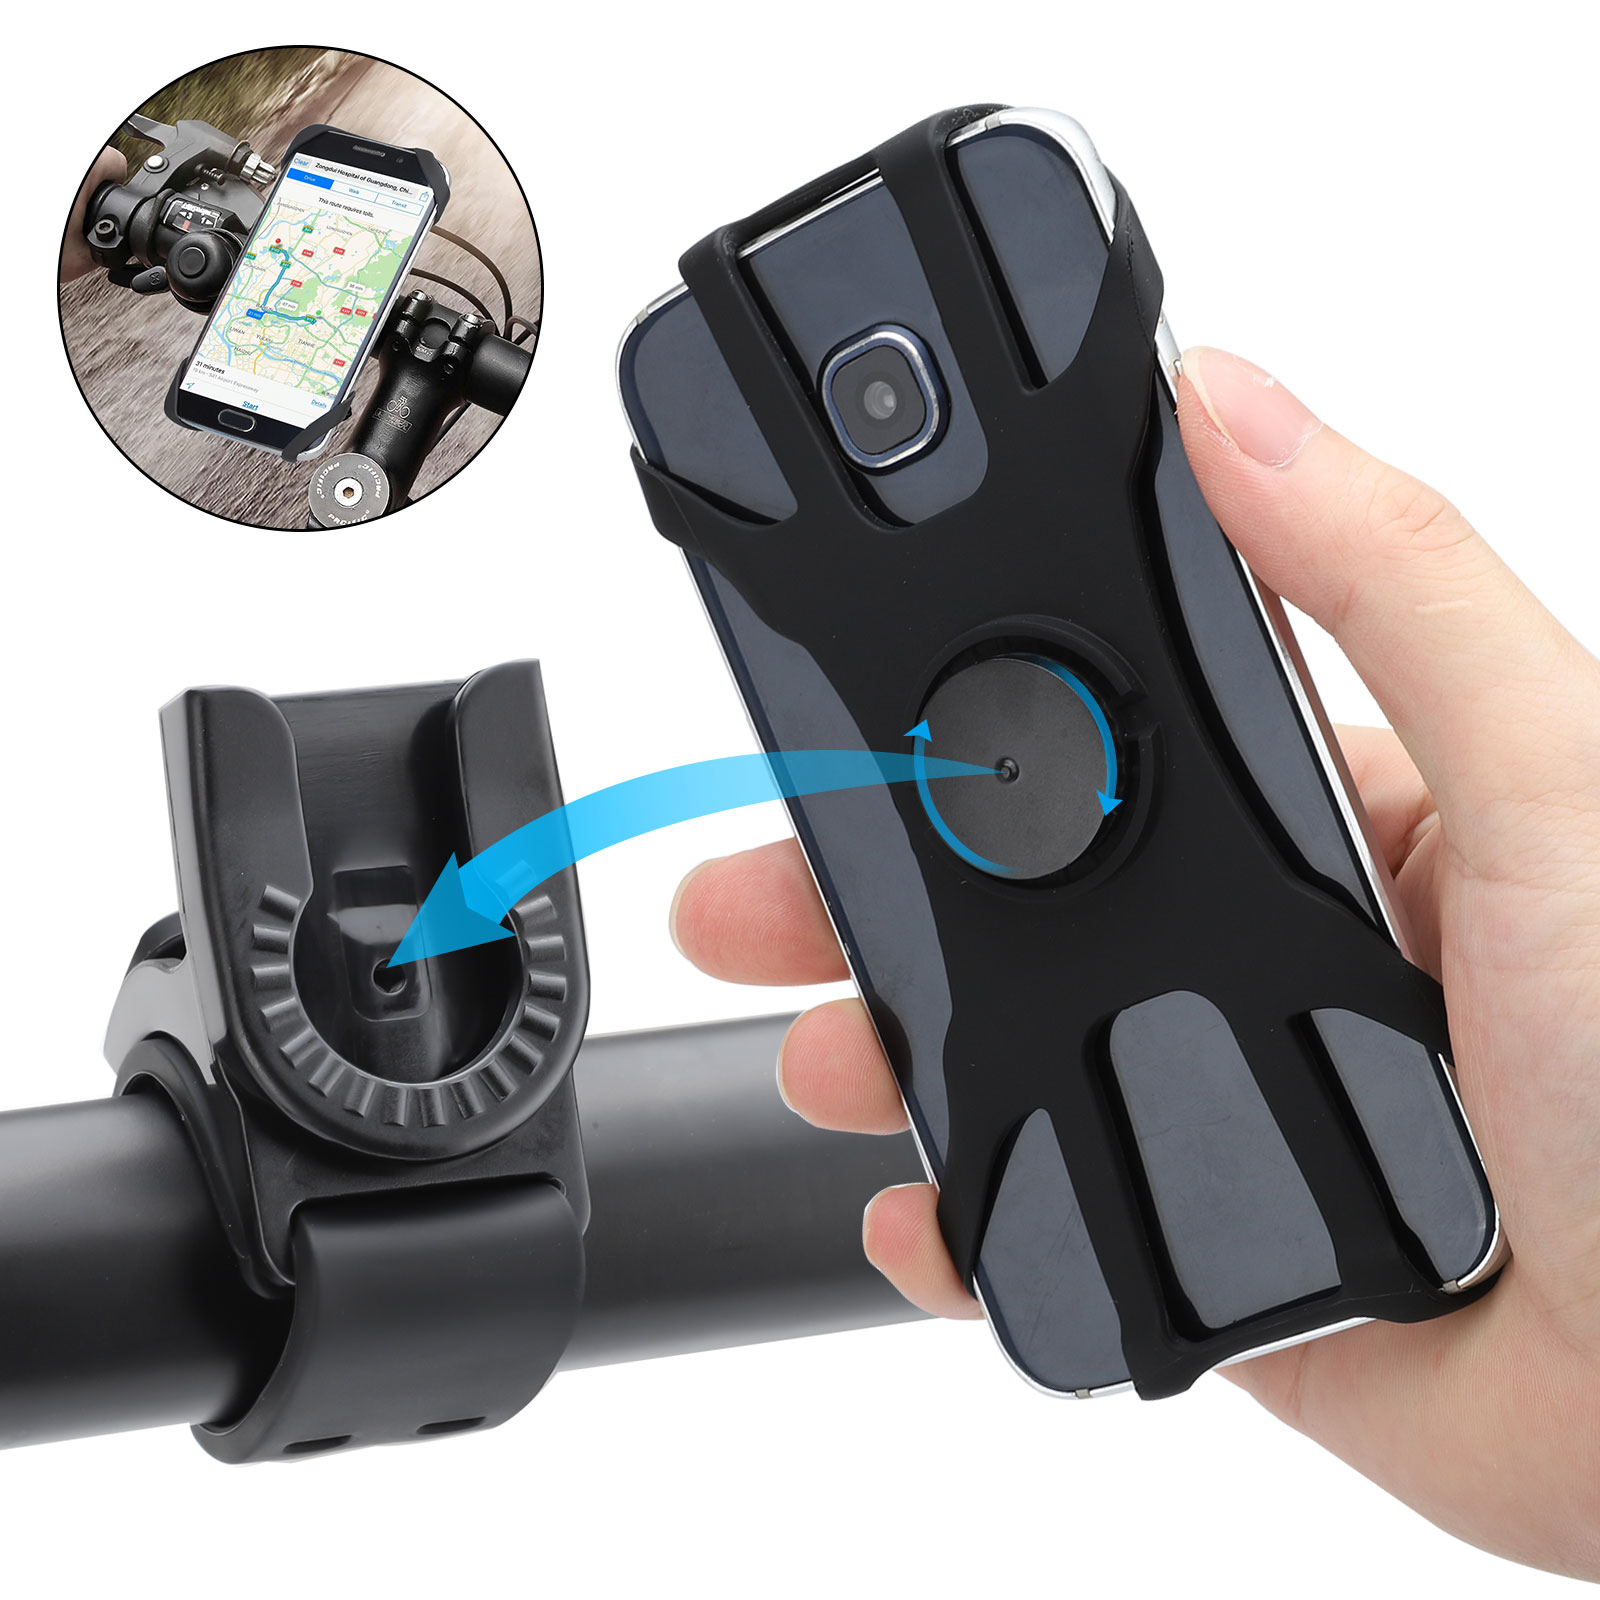 CNC Dual Bracket Adjustable Motorcycle Phone Mount For iPhone X 8 XR Samsung S10